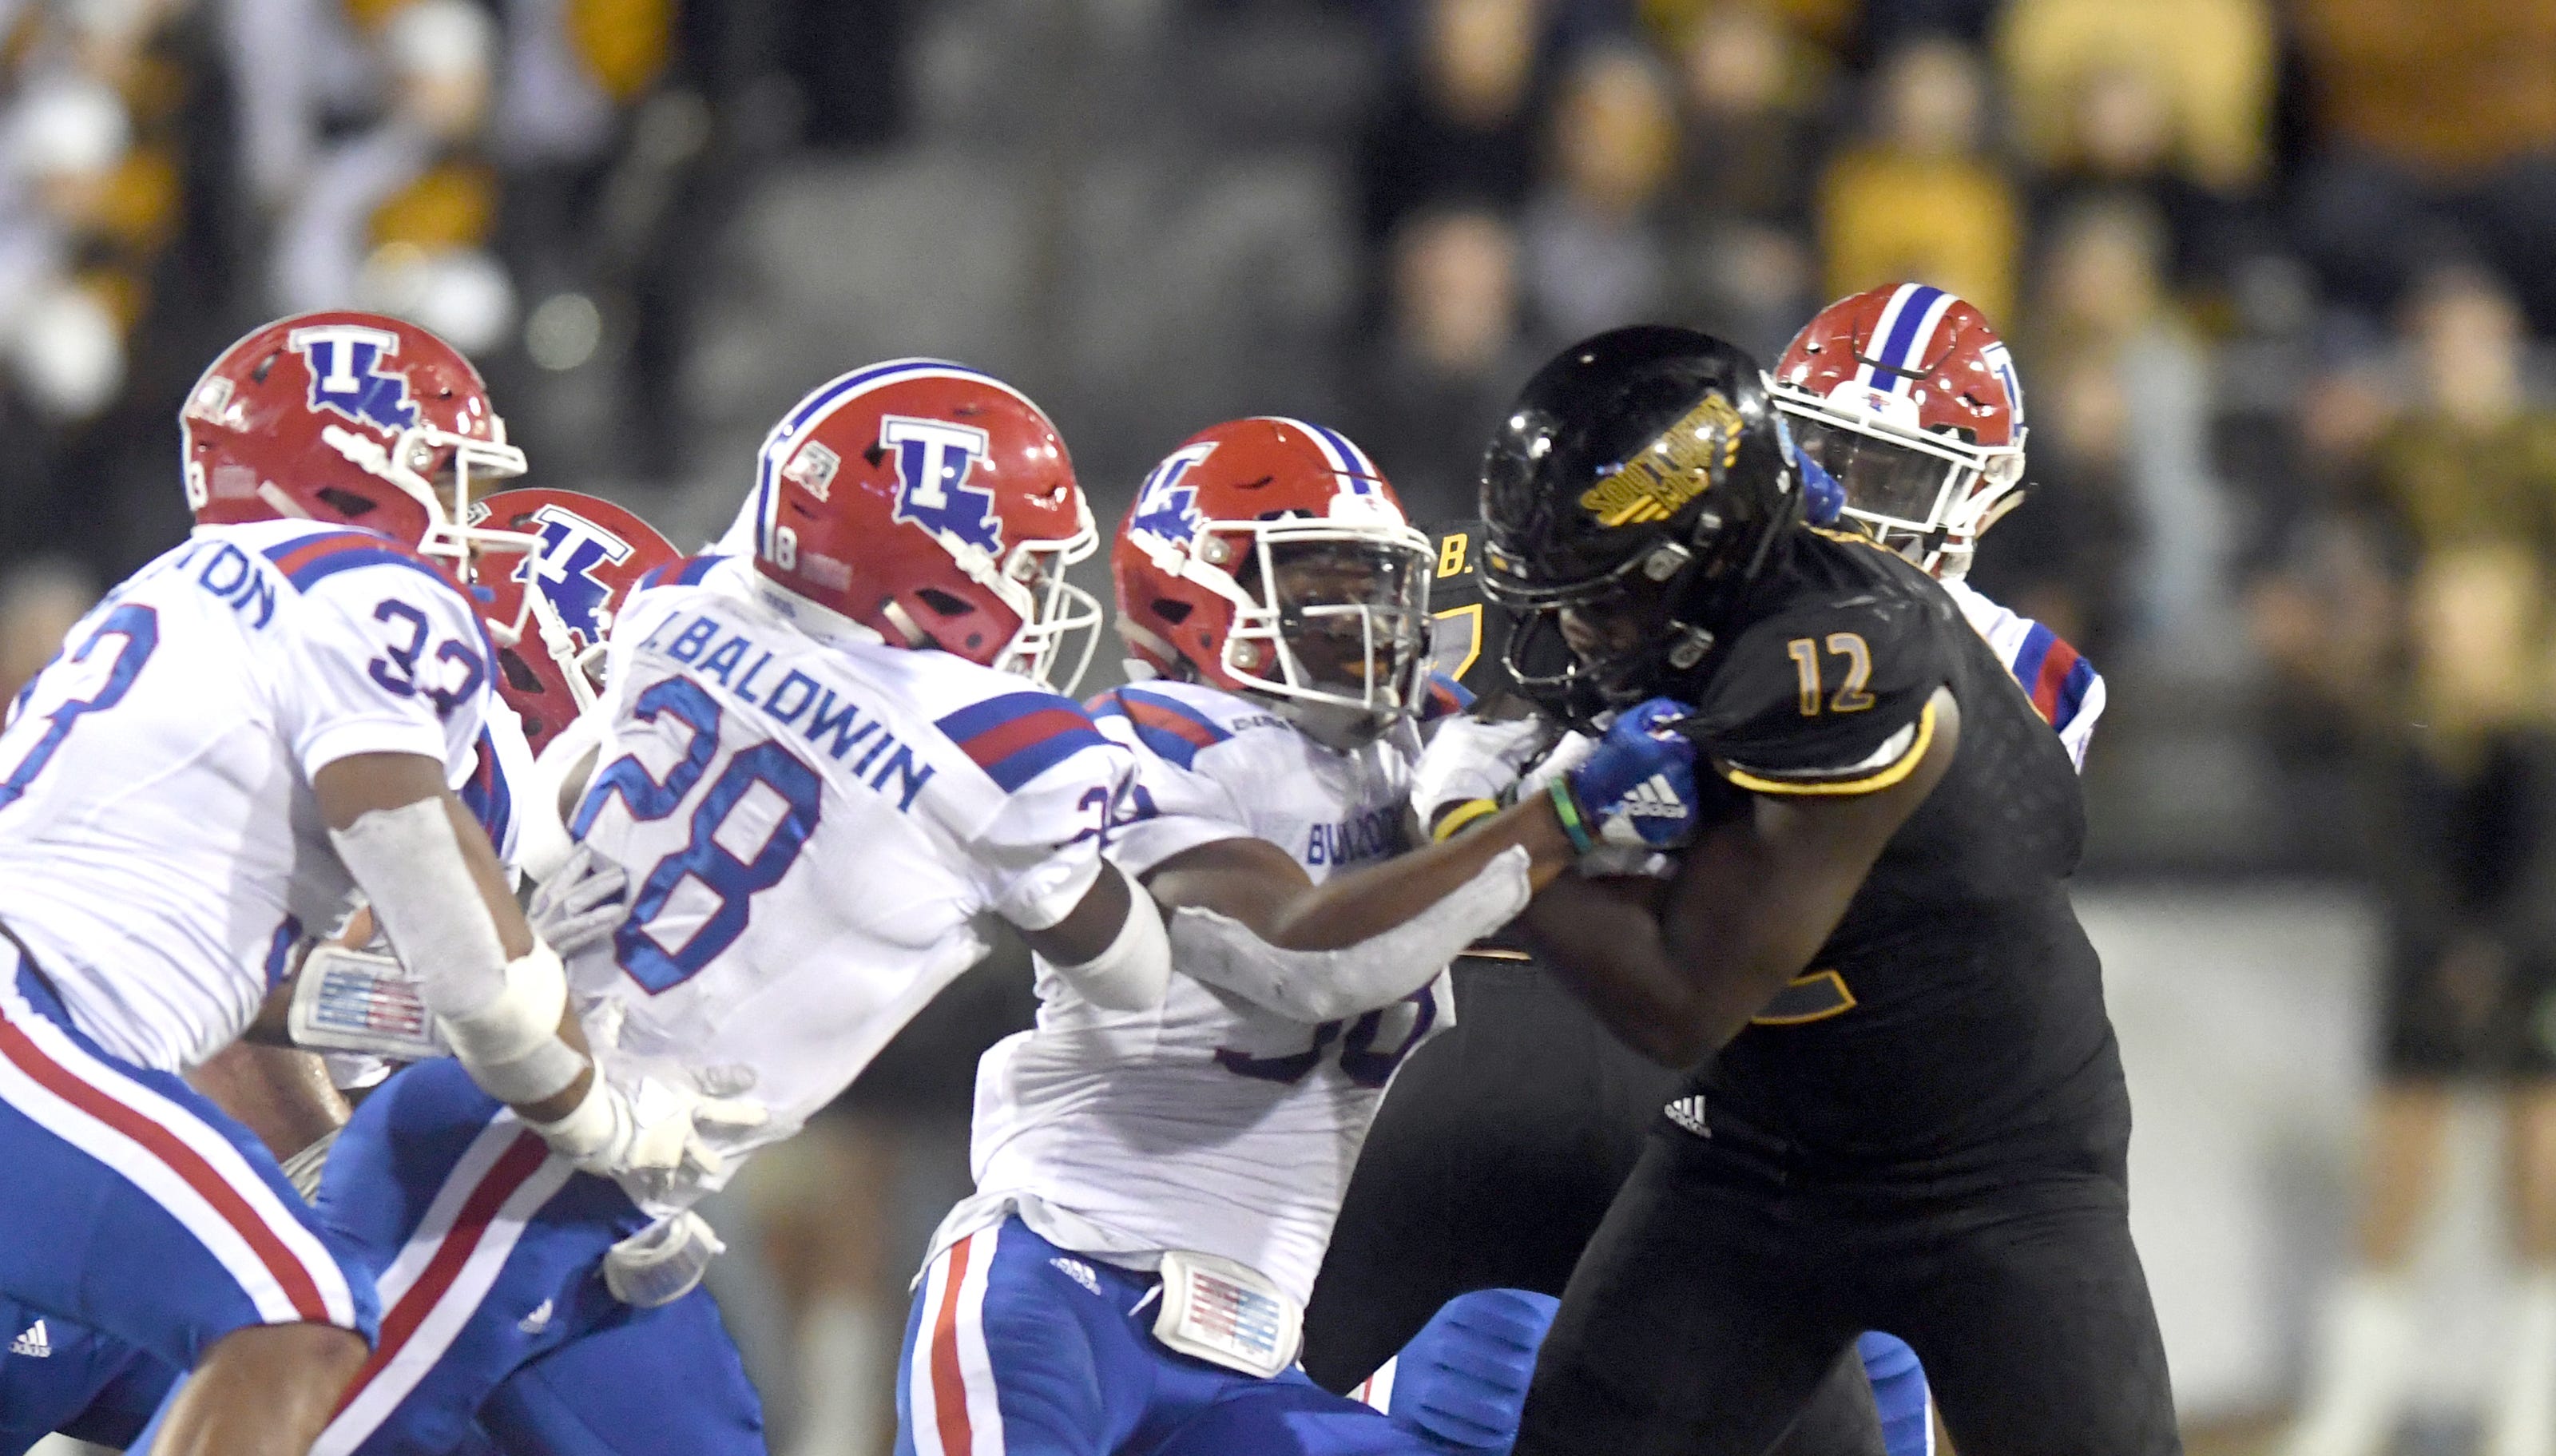 Southern Miss football adjusts schedule, adds 12th game against North